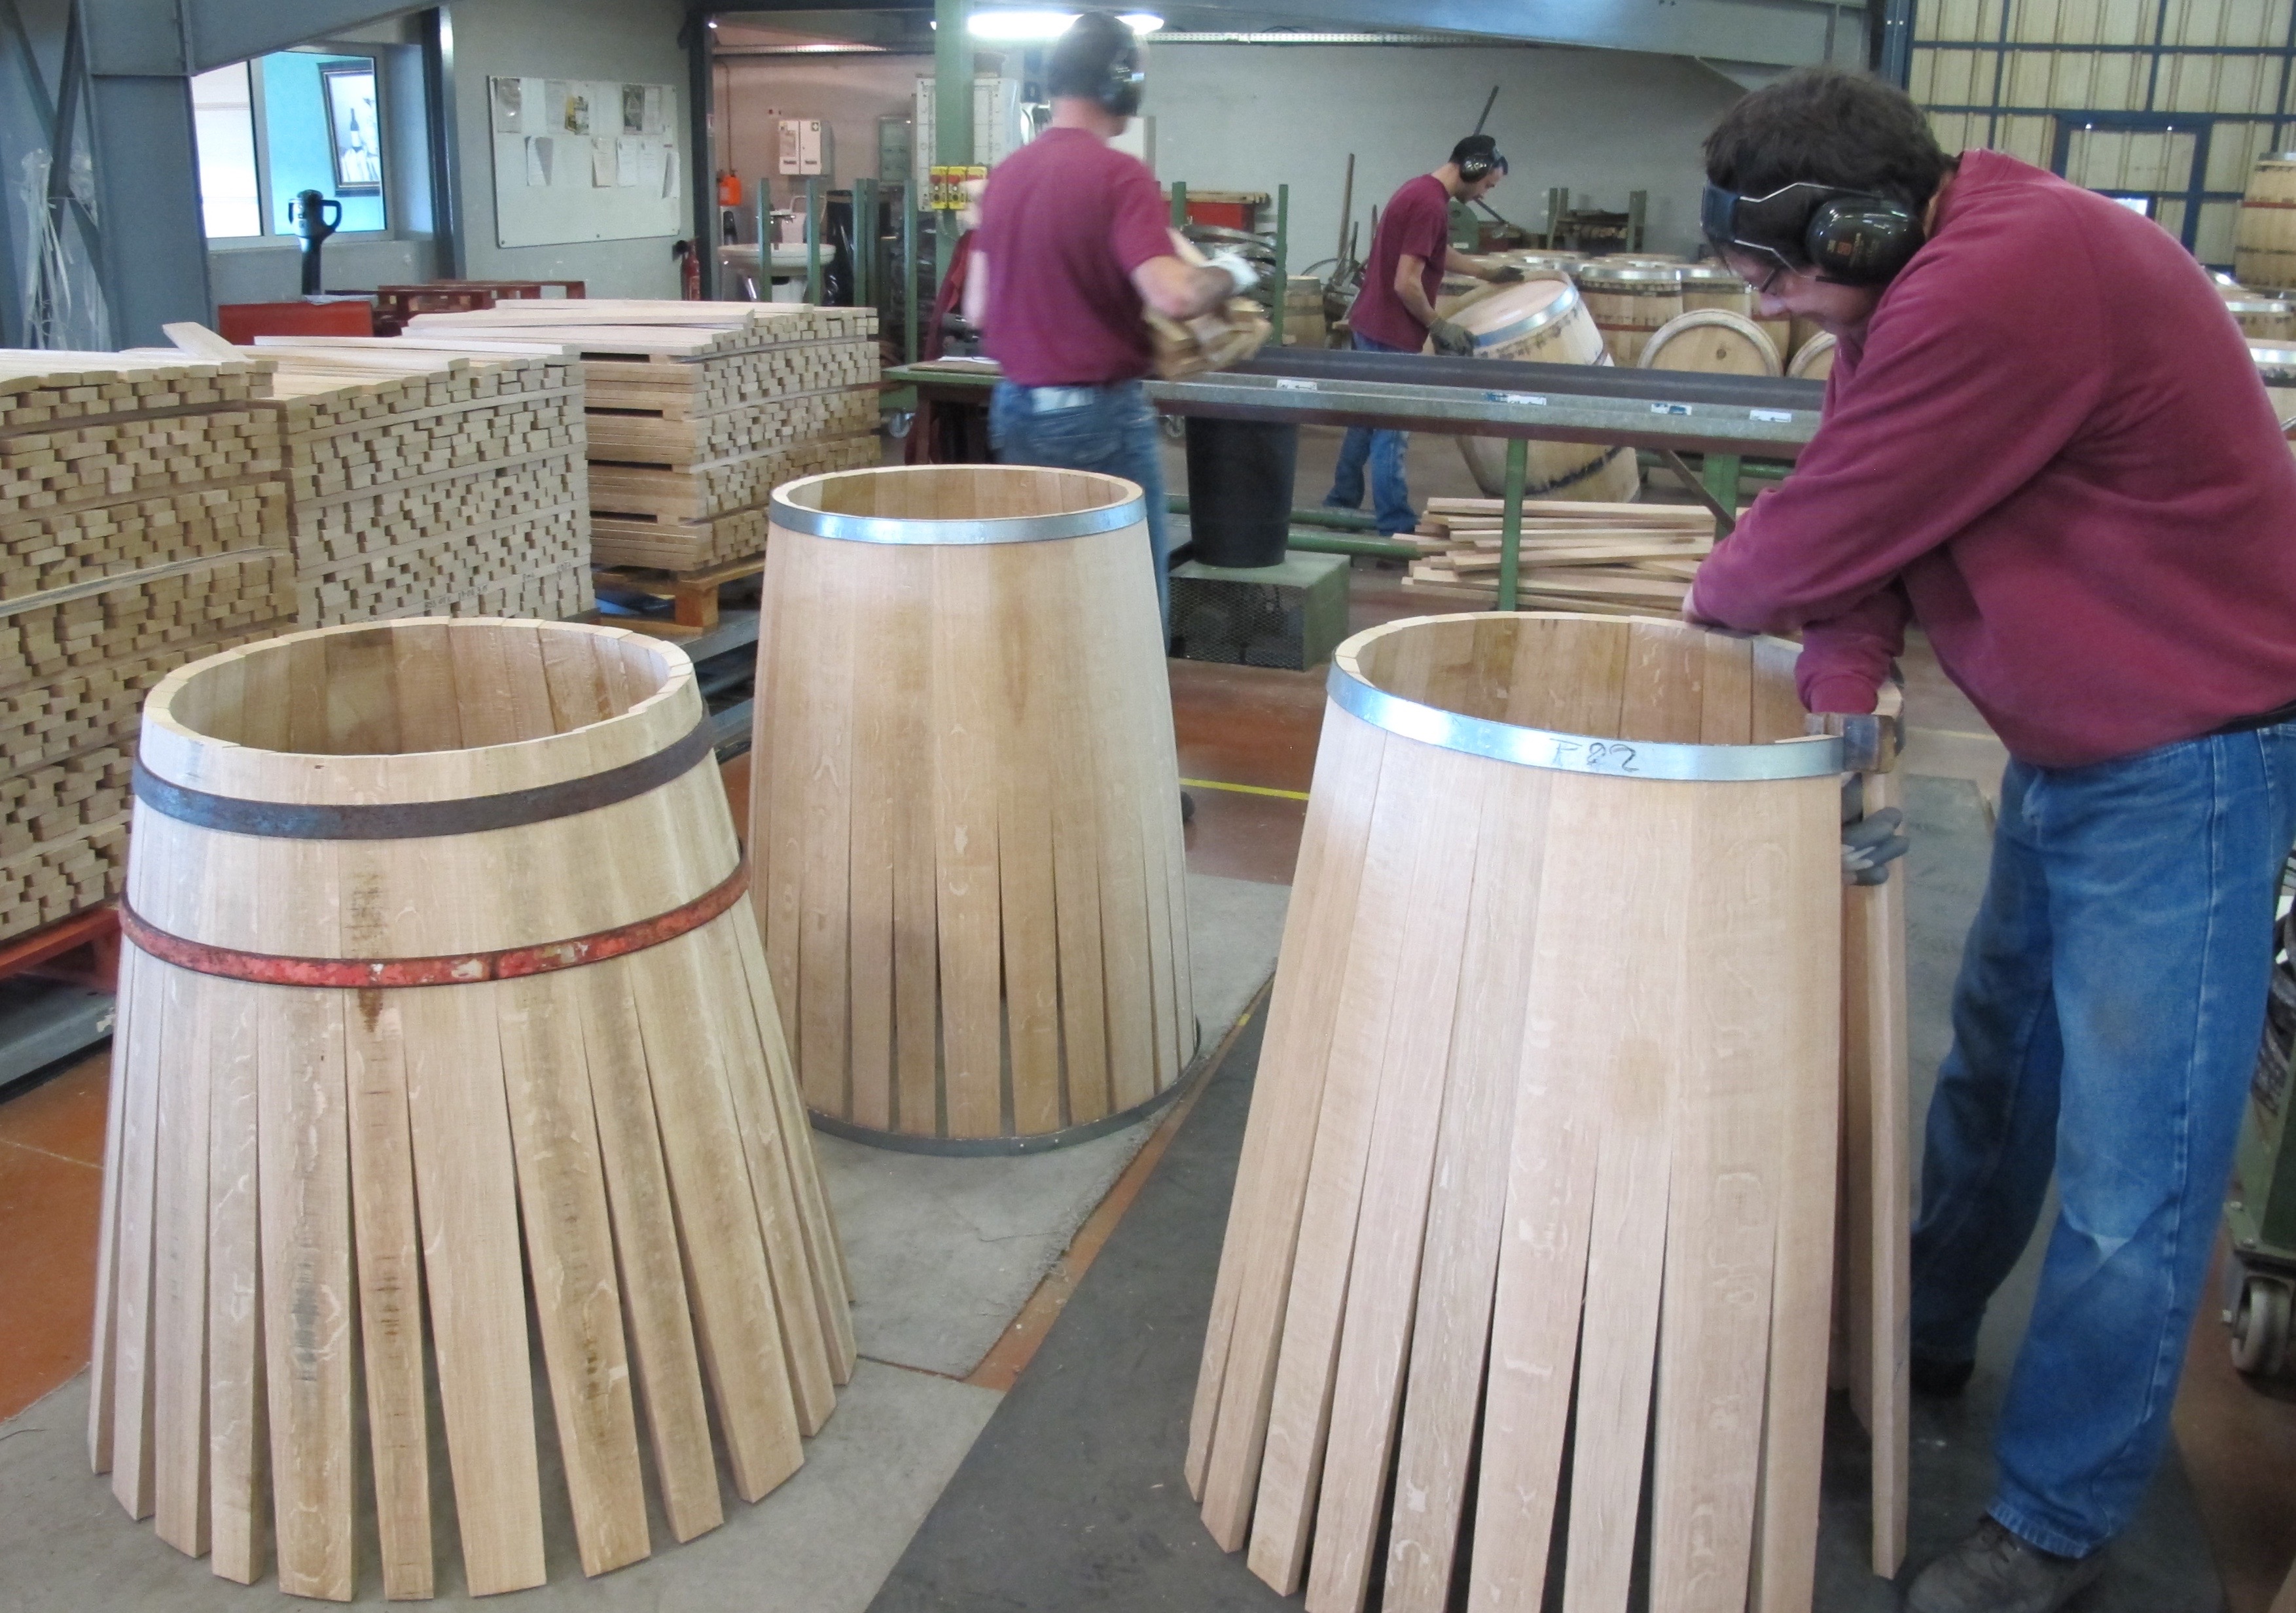 Sylvain coopers expertly bend the planks within the iron stays used to assemble the barrels. Photos by Marla Norman.